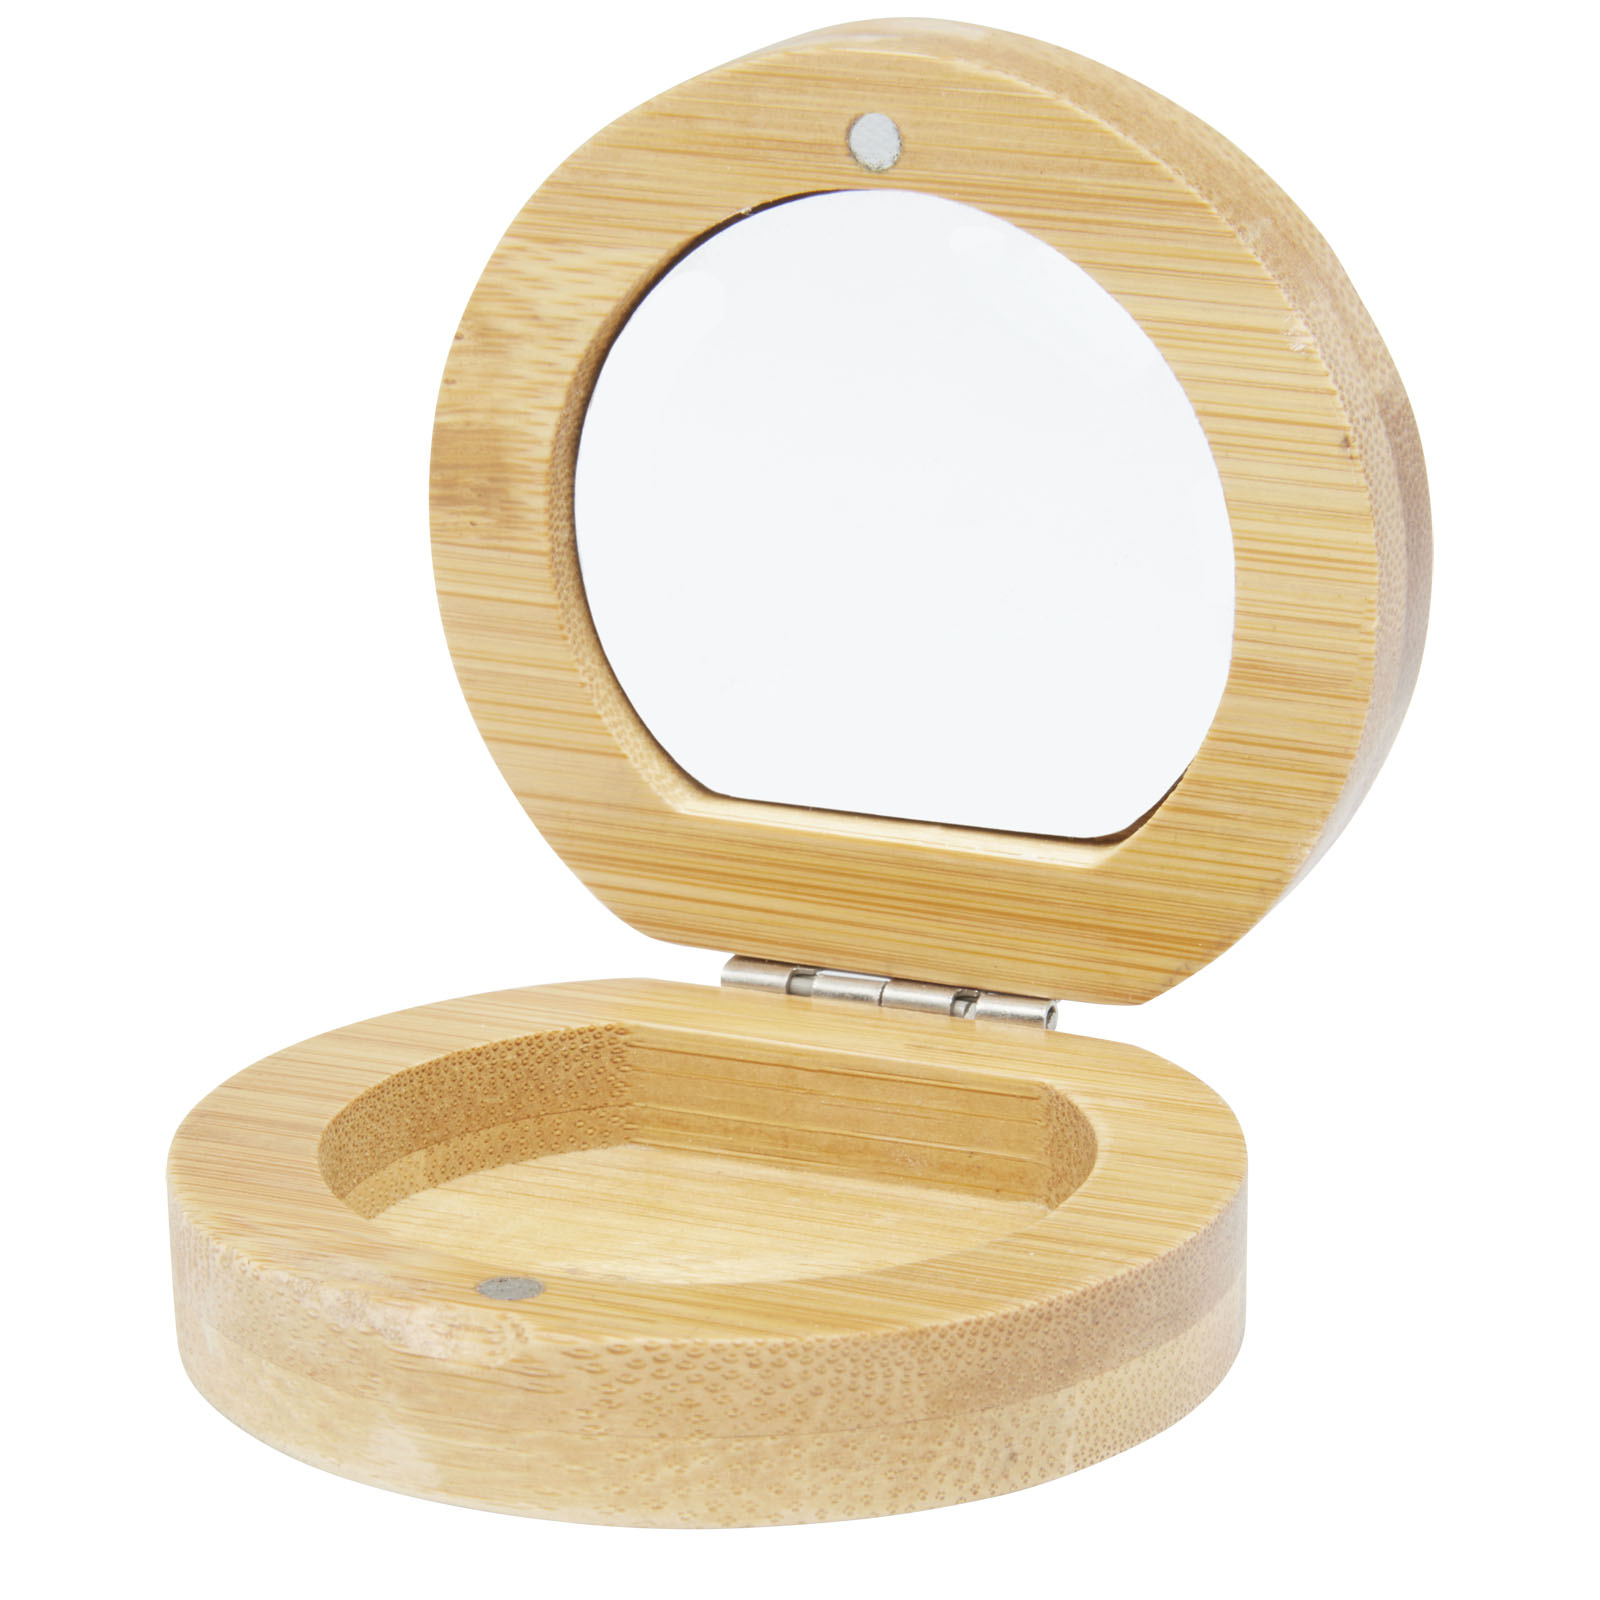 Health & Personal Care - Afrodit bamboo pocket mirror